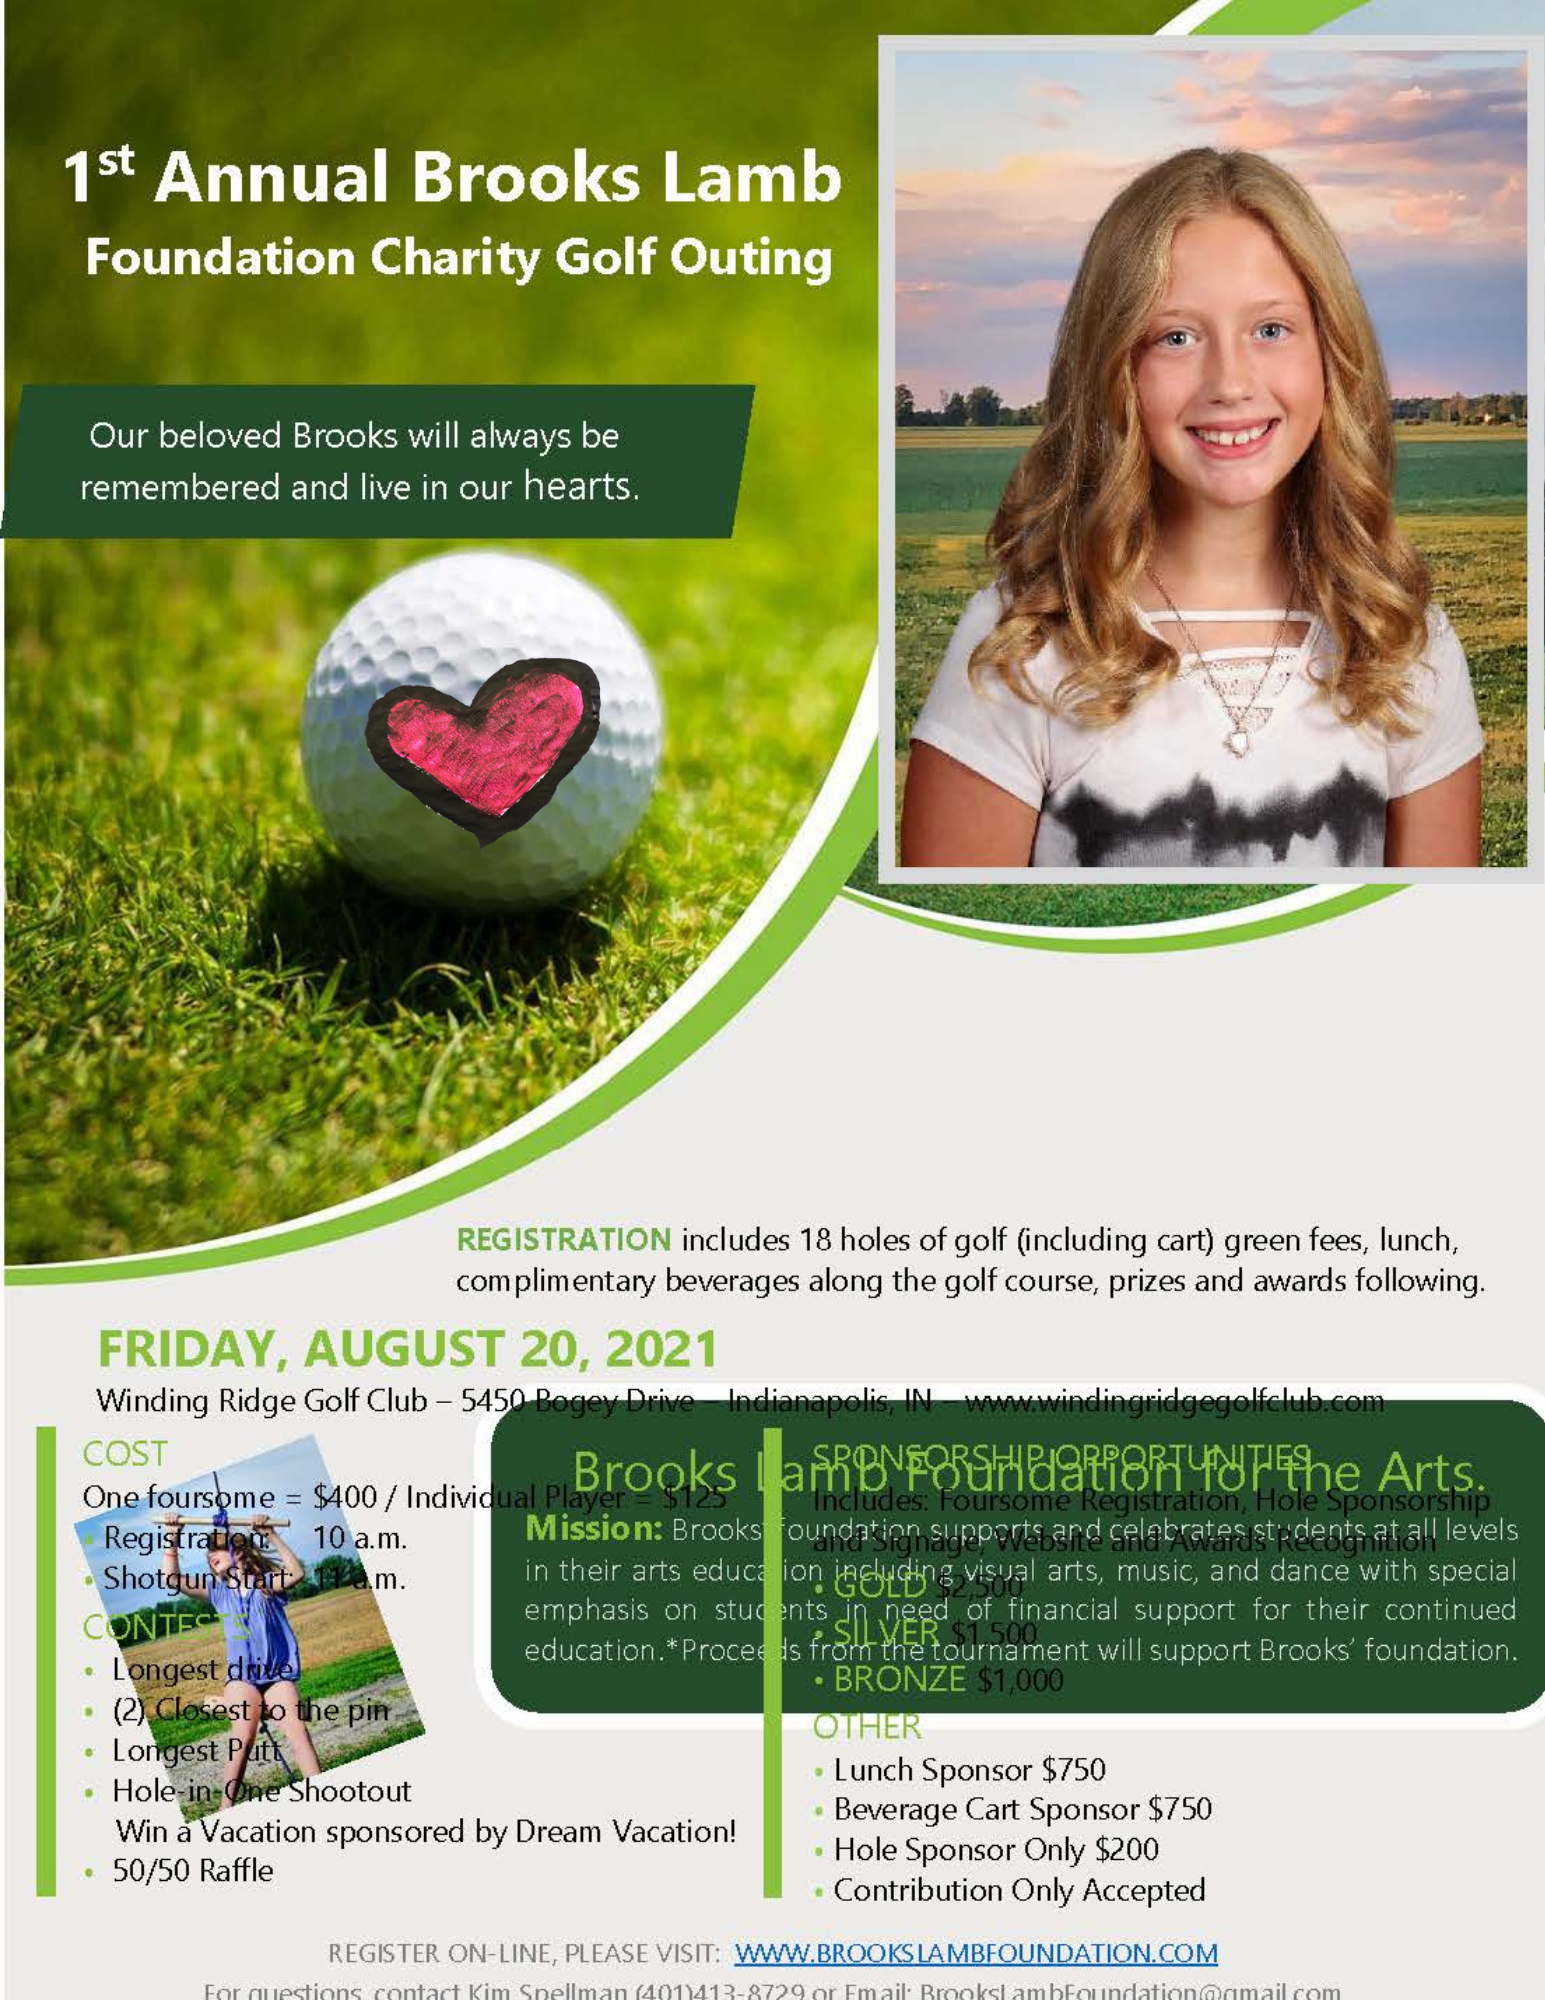 1st Annual Brooks Lamb Foundation Charity Golf Outing